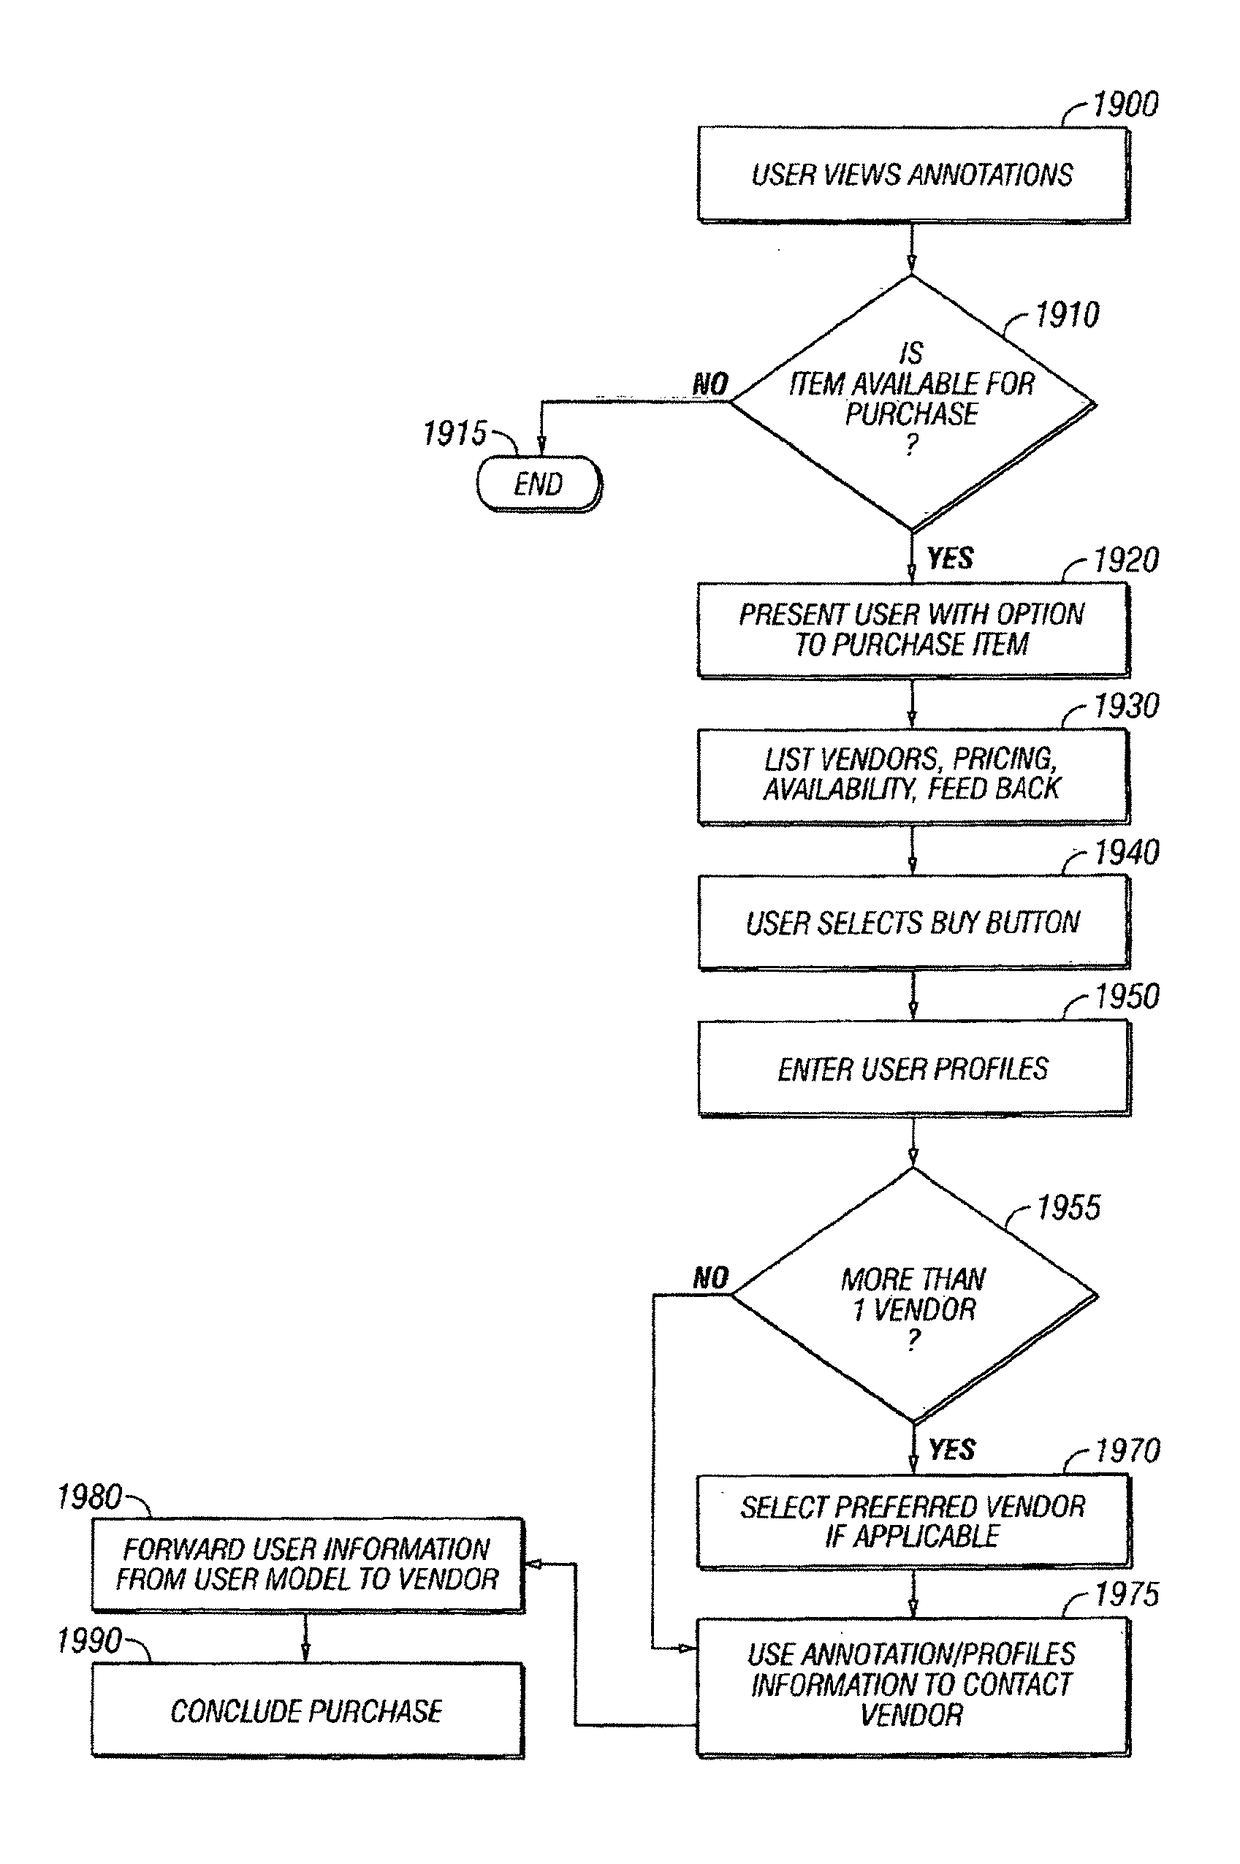 Systems and methods for mobile and online payment systems for purchases related to mobile and online promotions or offers provided using impressions tracking and analysis, location information, 2D and 3D mapping, mobile mapping, social media, and user behavior and